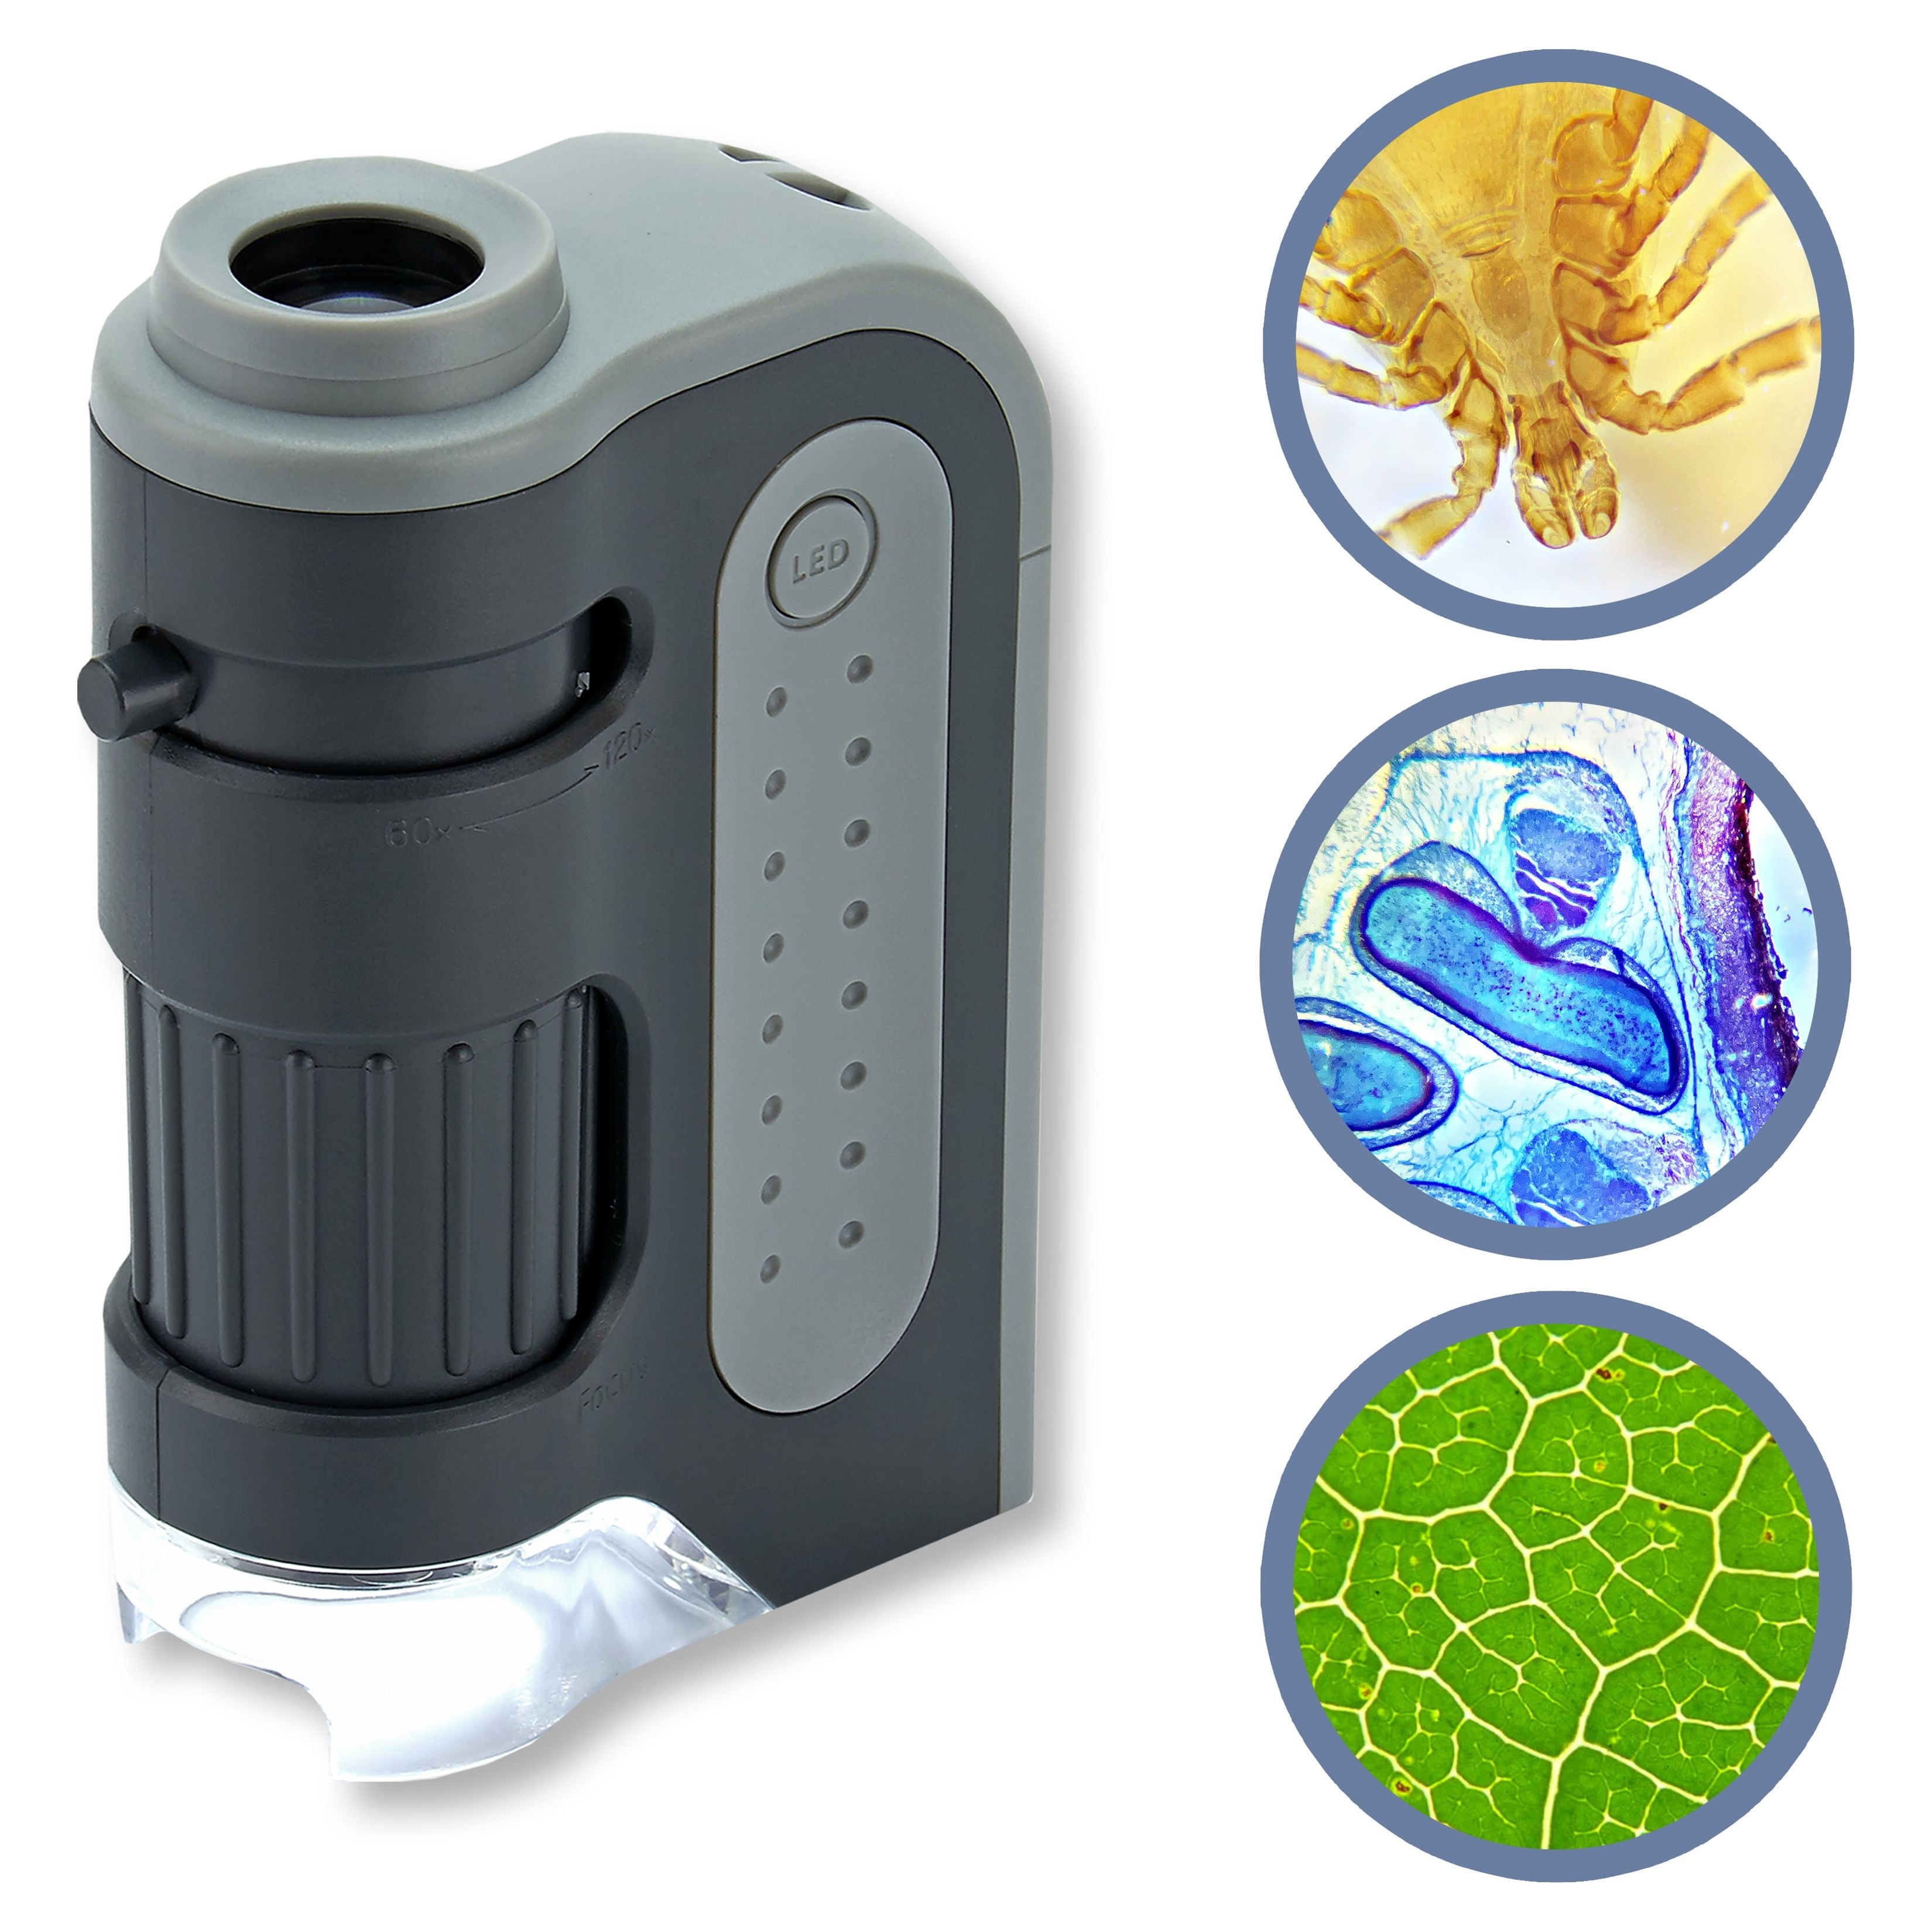 Carson MicroBrite™ Plus 60x - 120x LED Lighted Portable Pocket Microscope for Kids & Adults - image 1 of 9